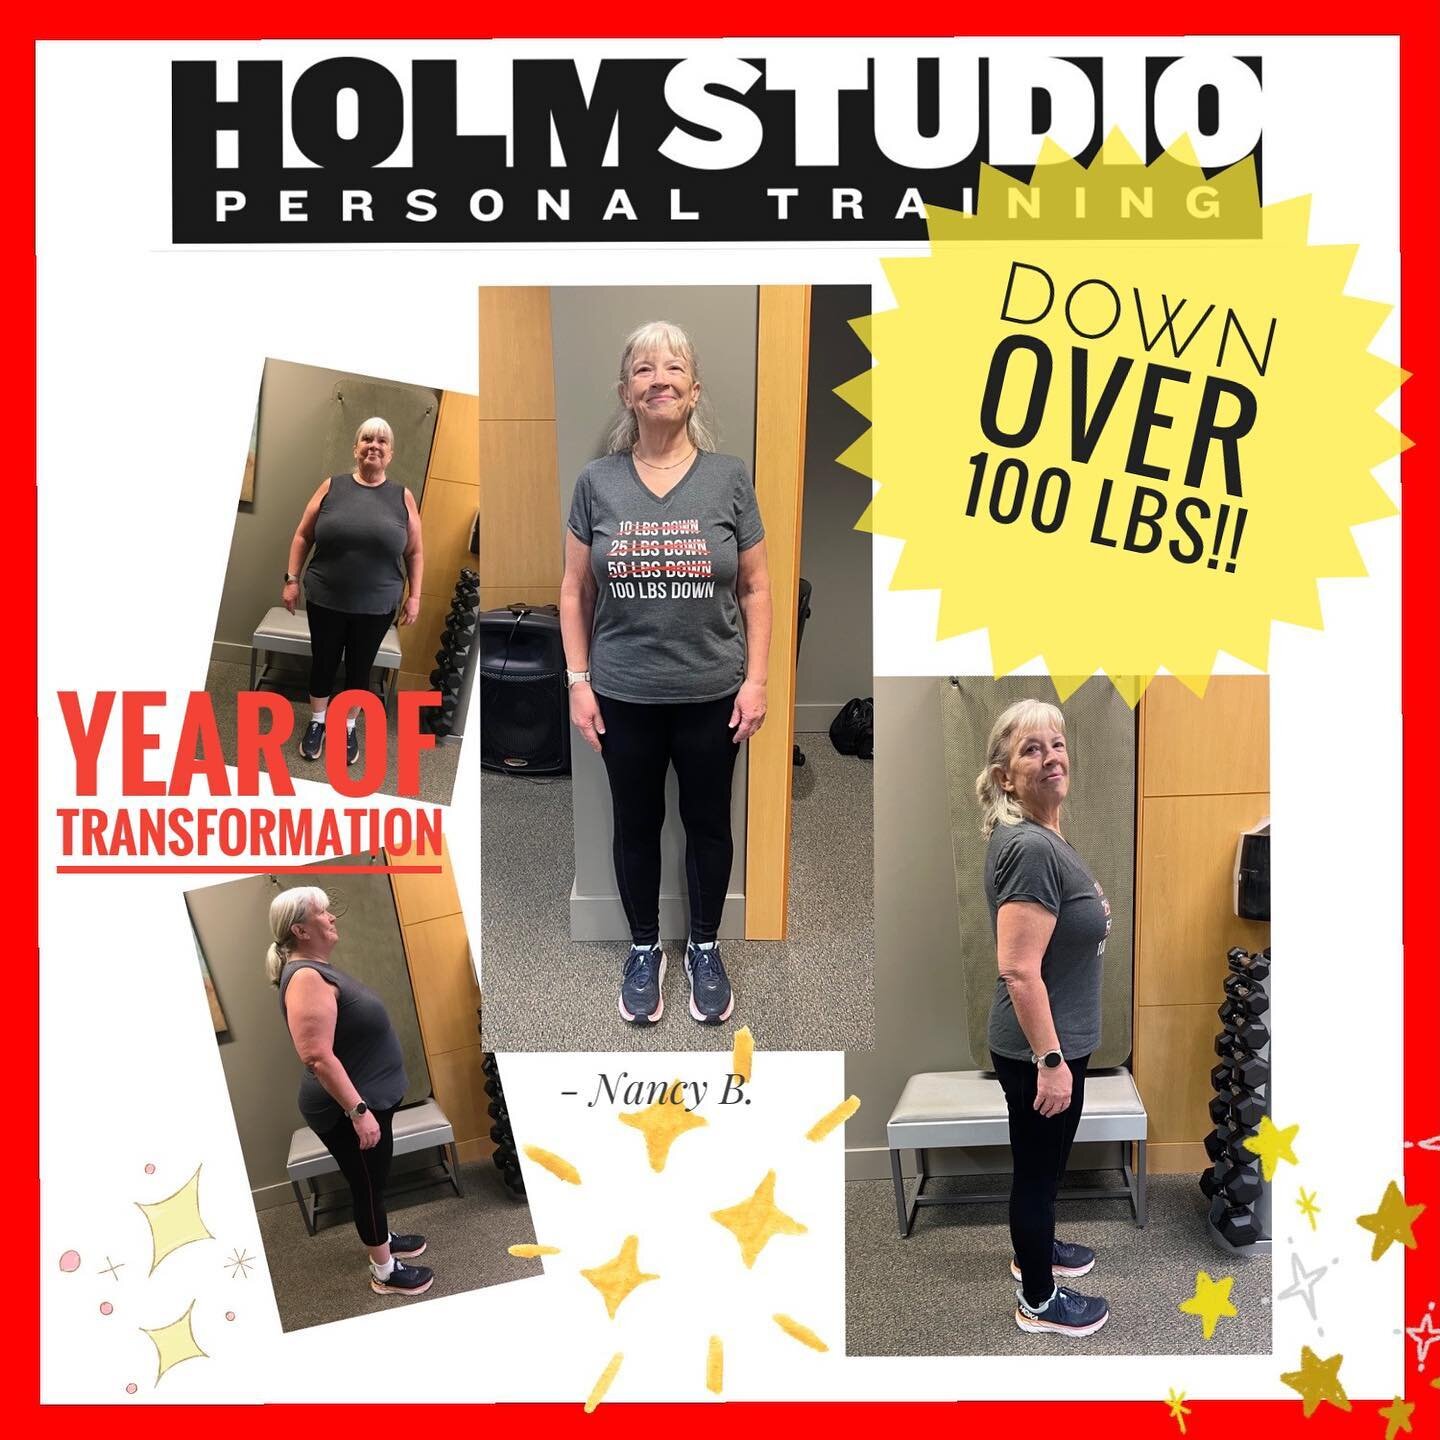 To say how incredibly proud we are of Nancy would be an understatement. 

Nancy has worked tirelessly this past year for these incredible results. Nancy shows up consistently ready to give her all. 

Thanks Nancy for being an inspiration to us, your 